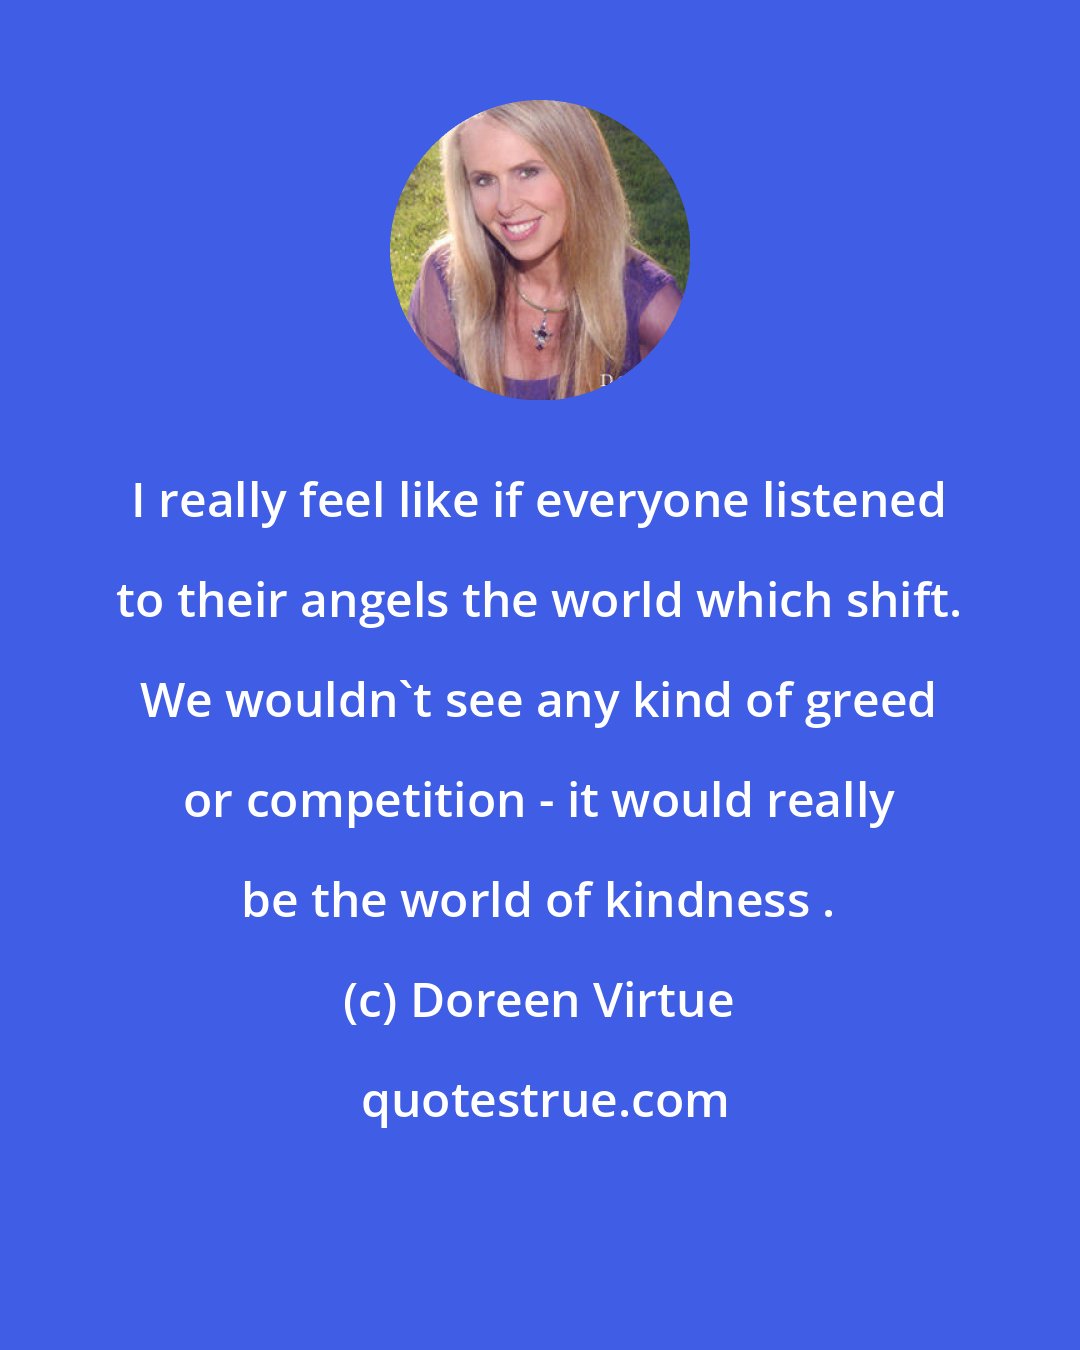 Doreen Virtue: I really feel like if everyone listened to their angels the world which shift. We wouldn't see any kind of greed or competition - it would really be the world of kindness .